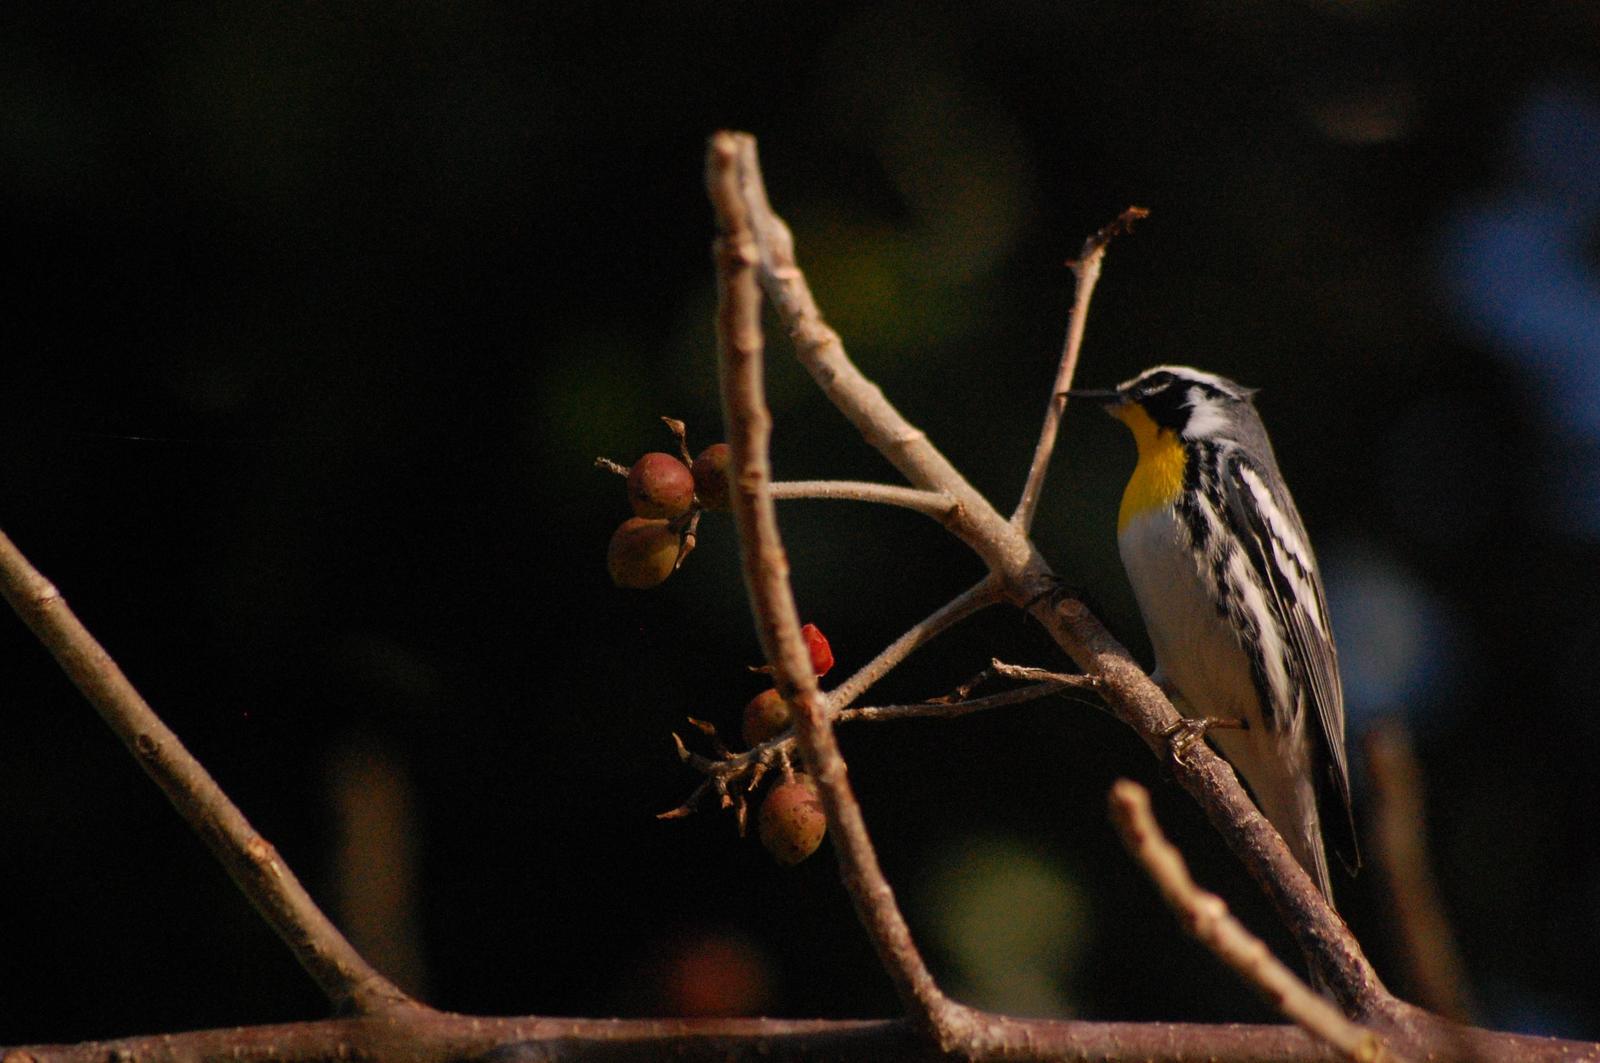 Yellow-throated Warbler Photo by Ted Goshulak